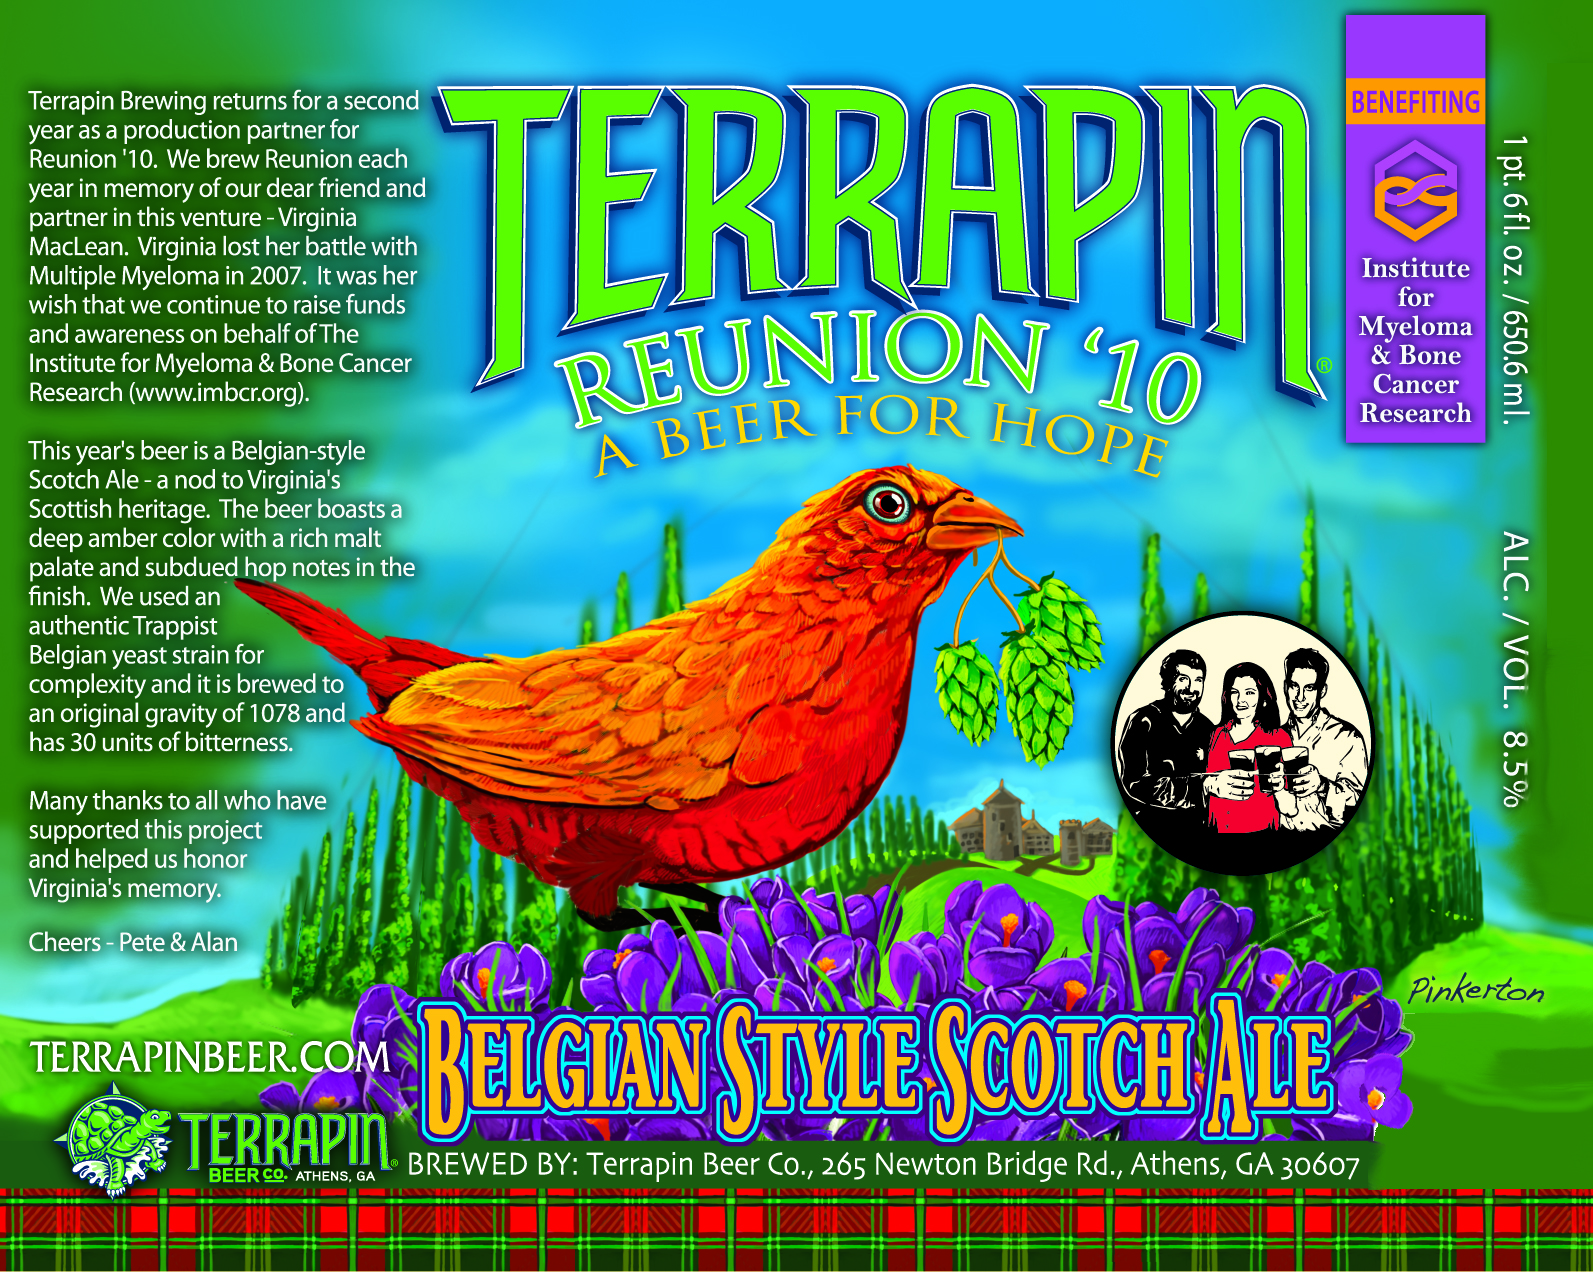 dead and co mixlr terrapin radio